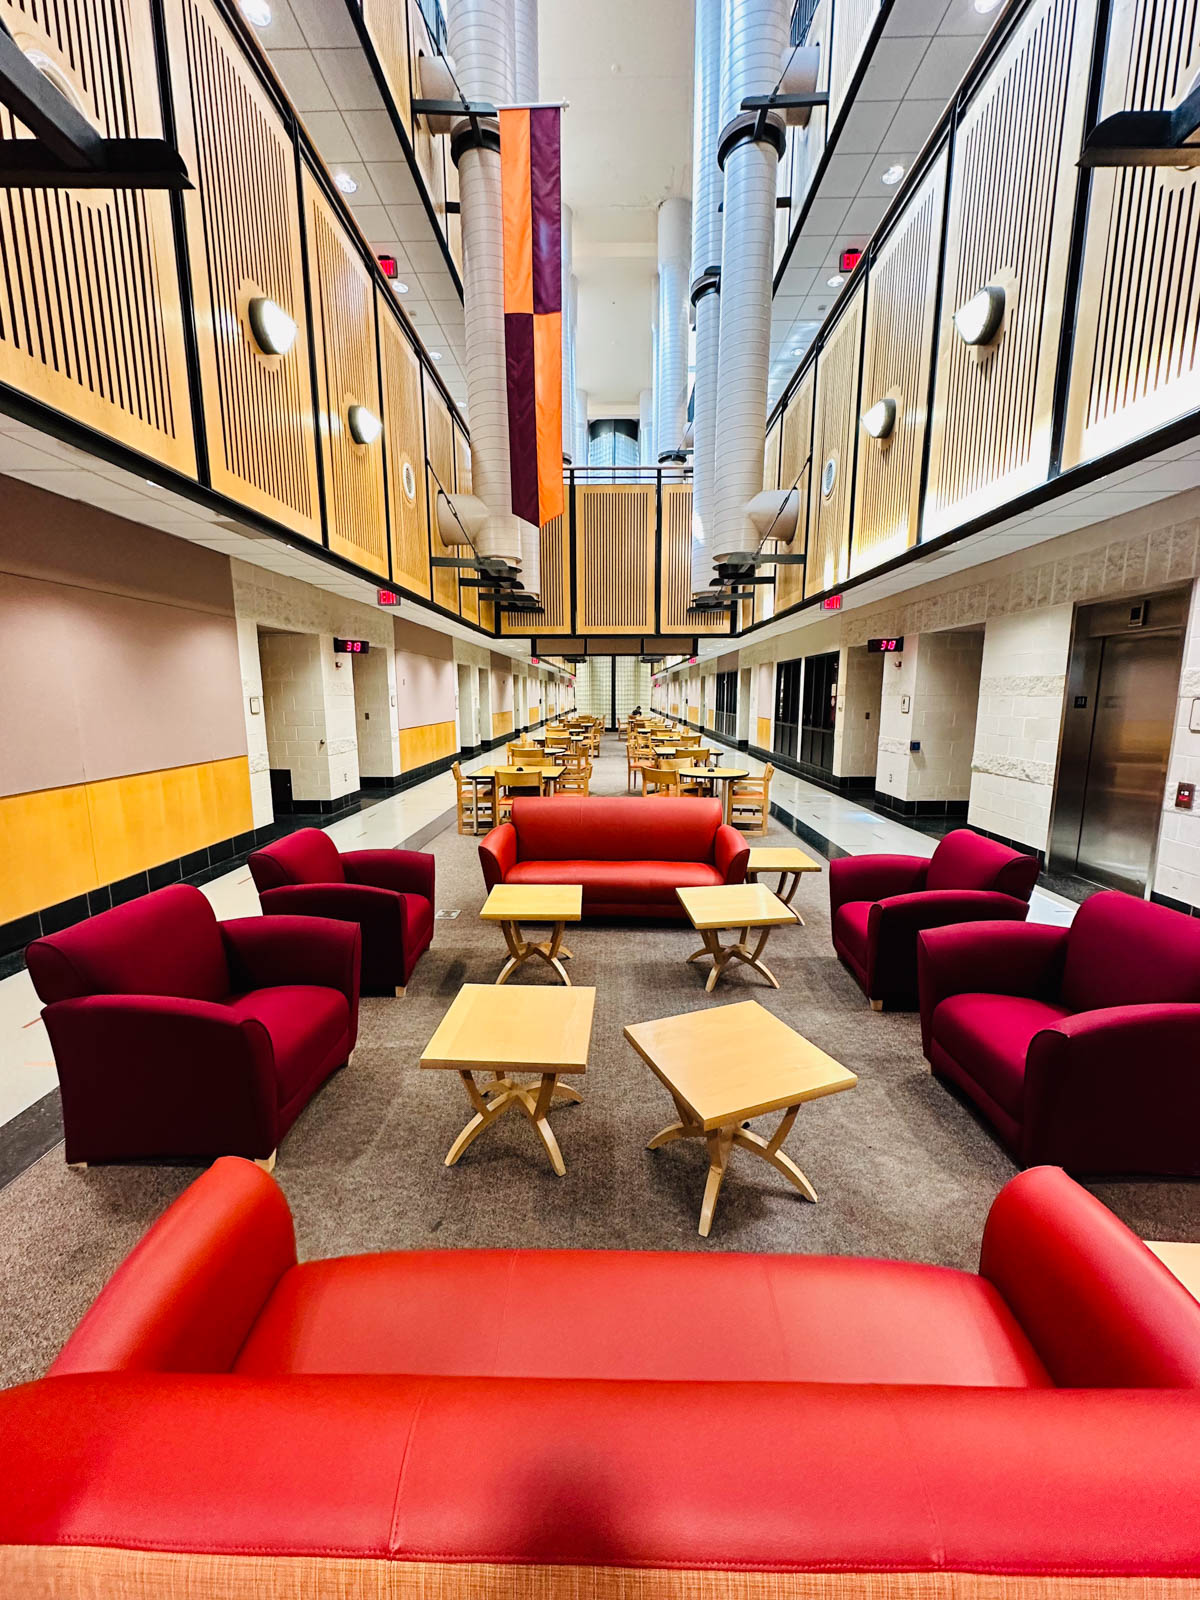 An inside view of Torgersen Hall shows red couches and tables.